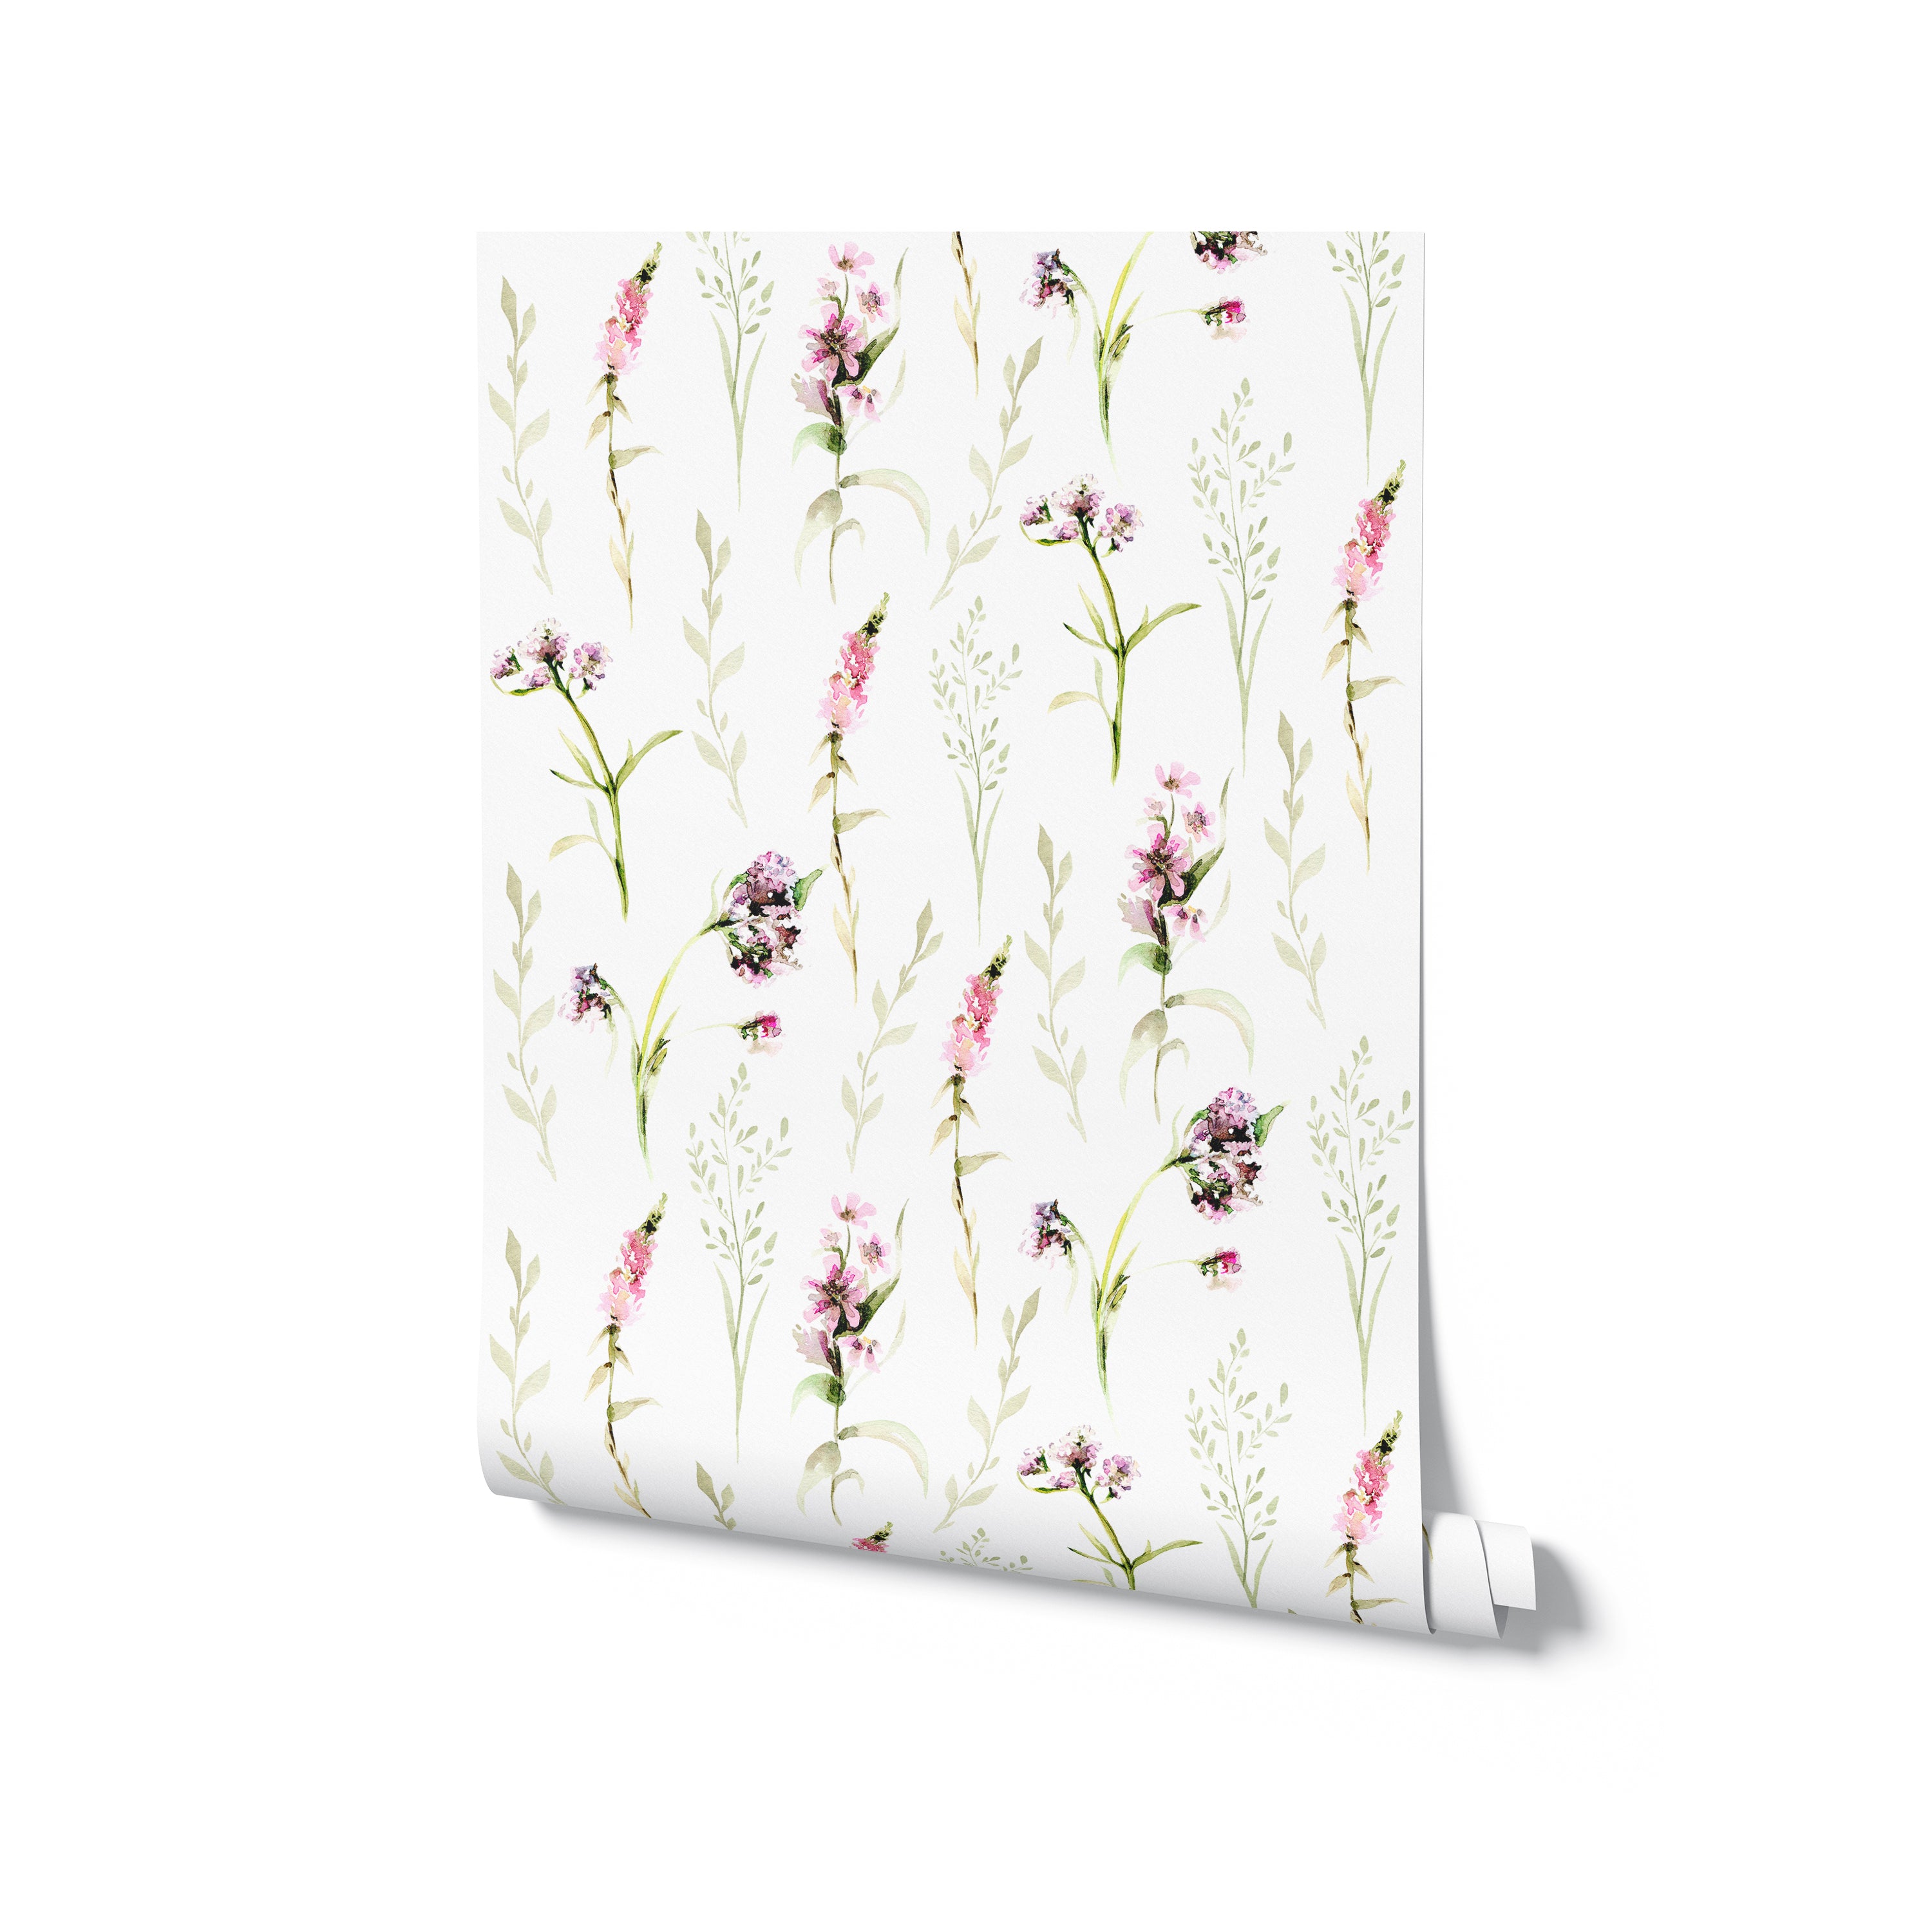 A rolled-up piece of 'Blooming Spring Wallpaper' against a white background, highlighting the elegant floral pattern of pink flowers and green leaves, ready for application or display.